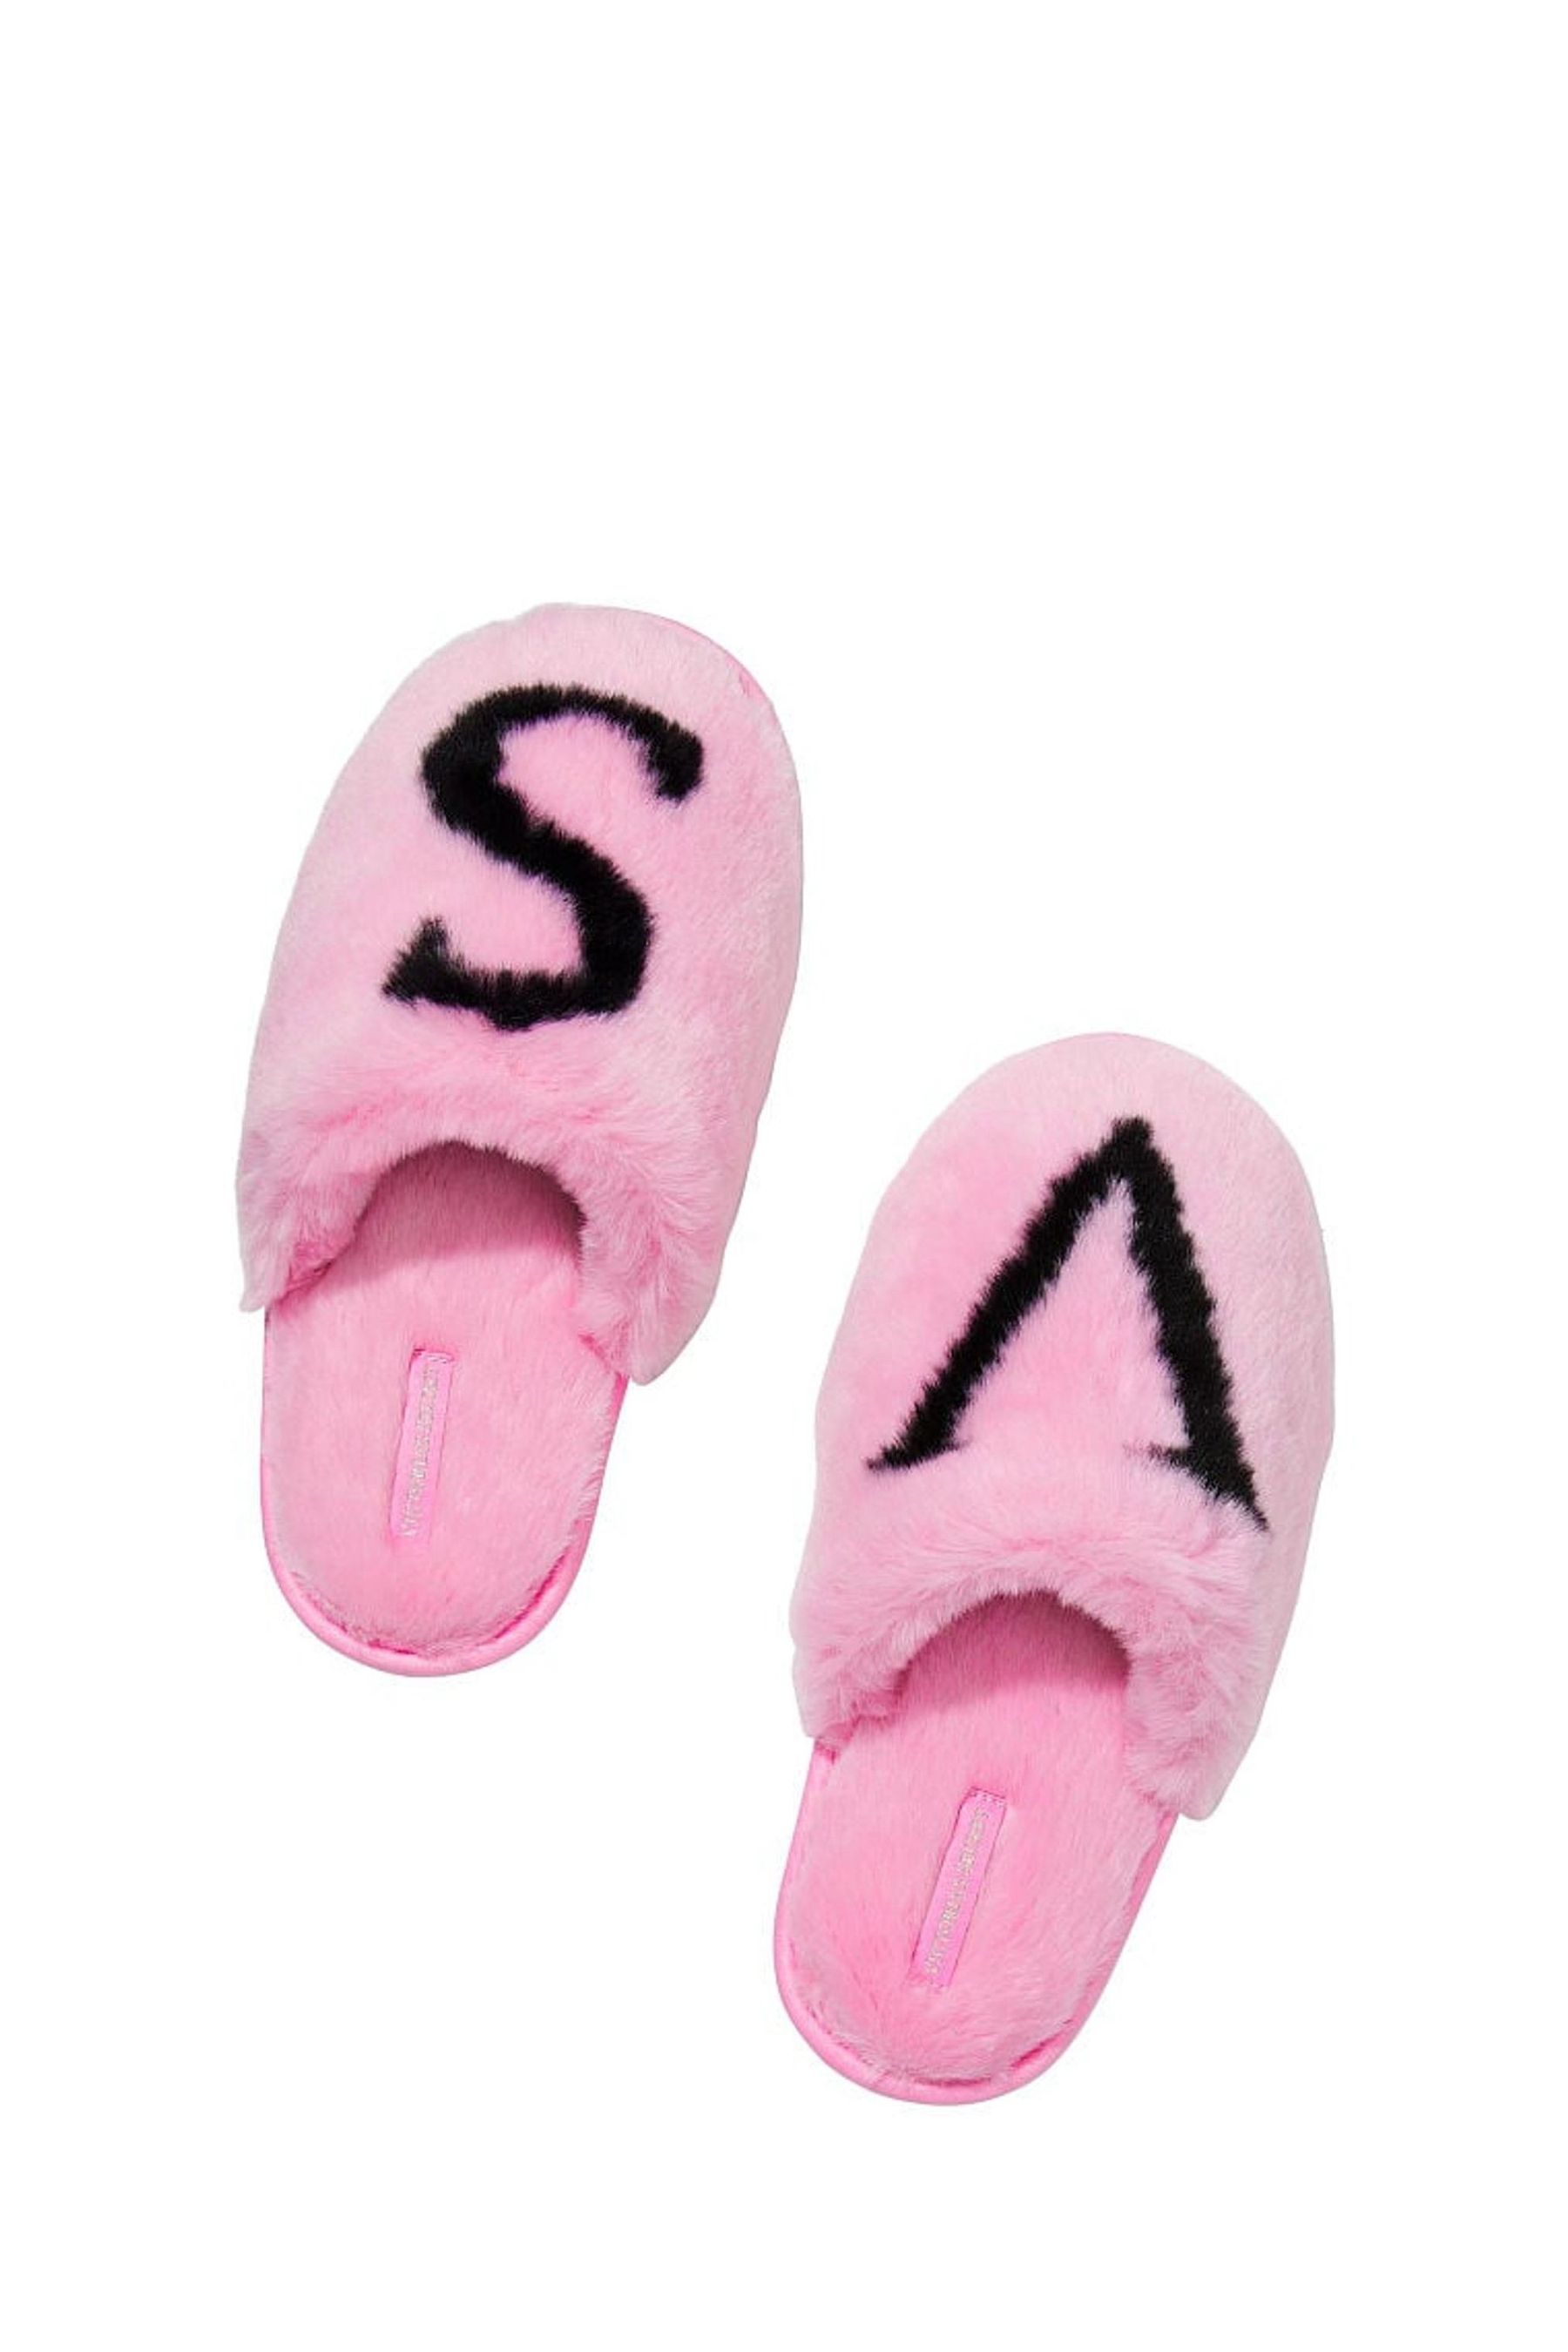 Buy Victoria's Secret Closed Toe Faux Fur Slippers from the Victoria's ...